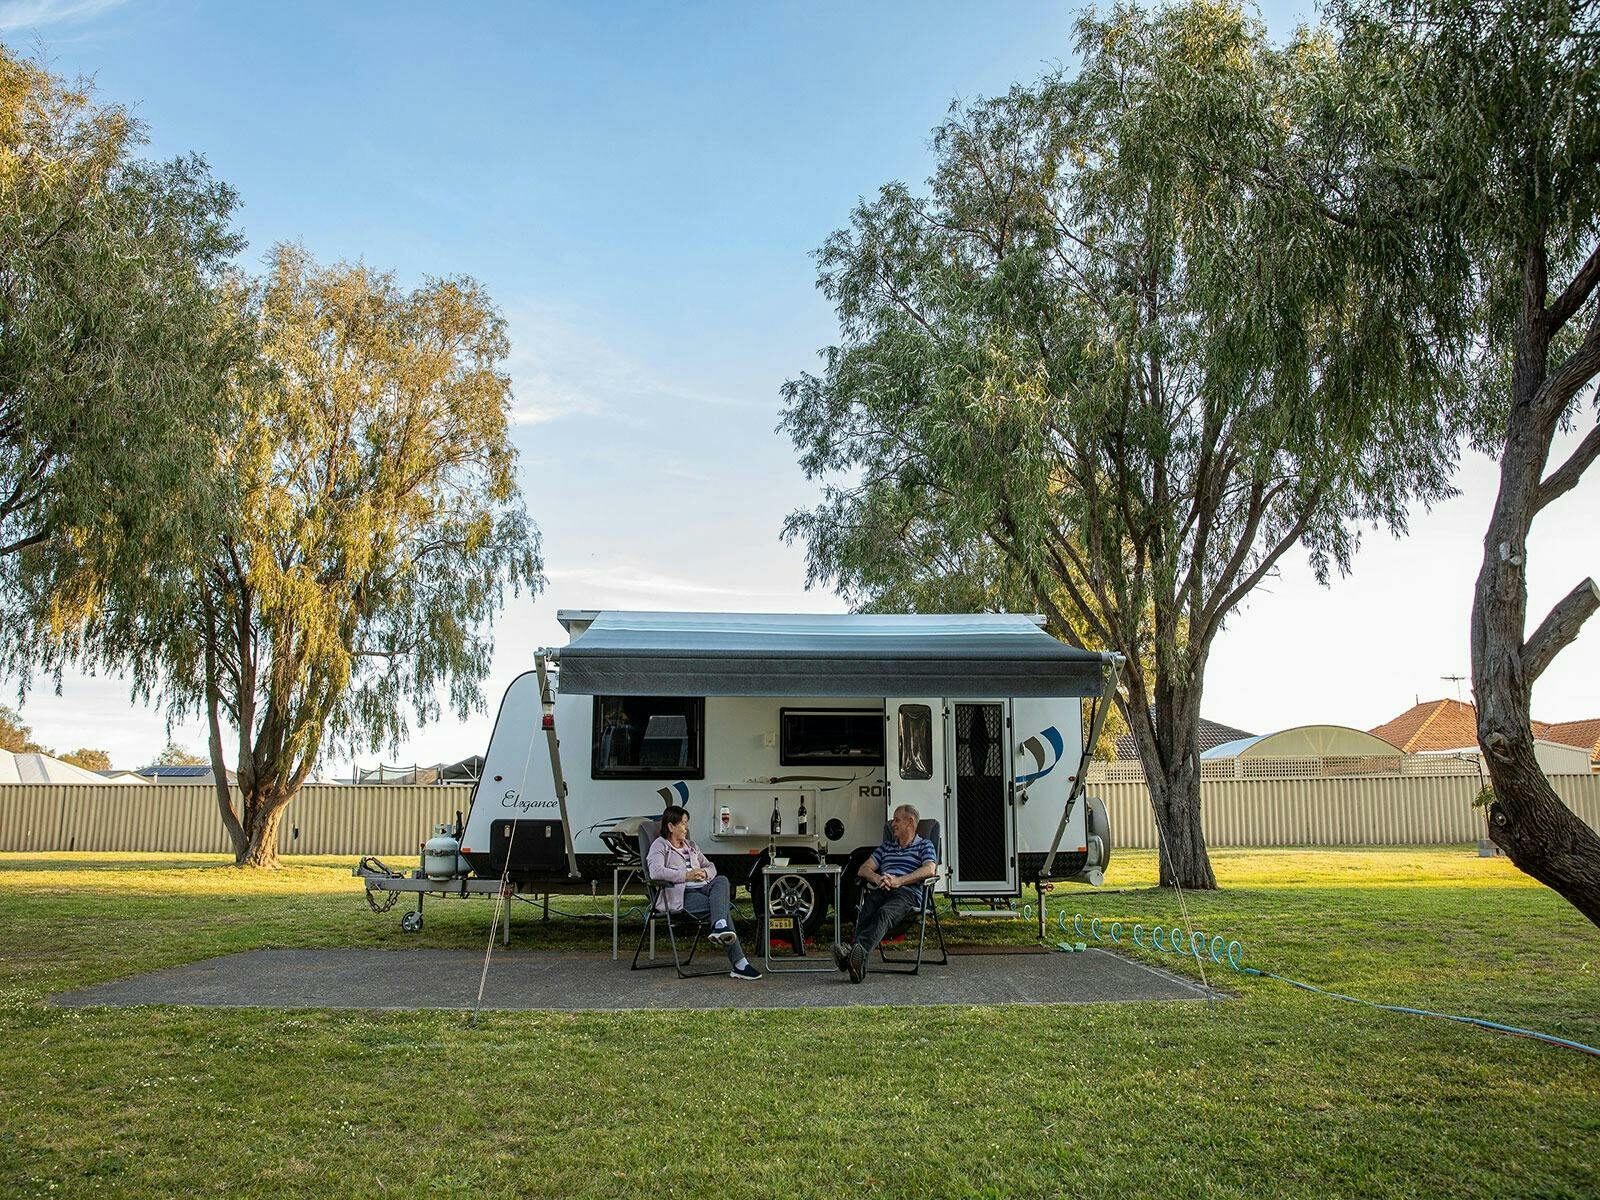 A couple sit outside their caravan surrounded by green grass and peppermint trees